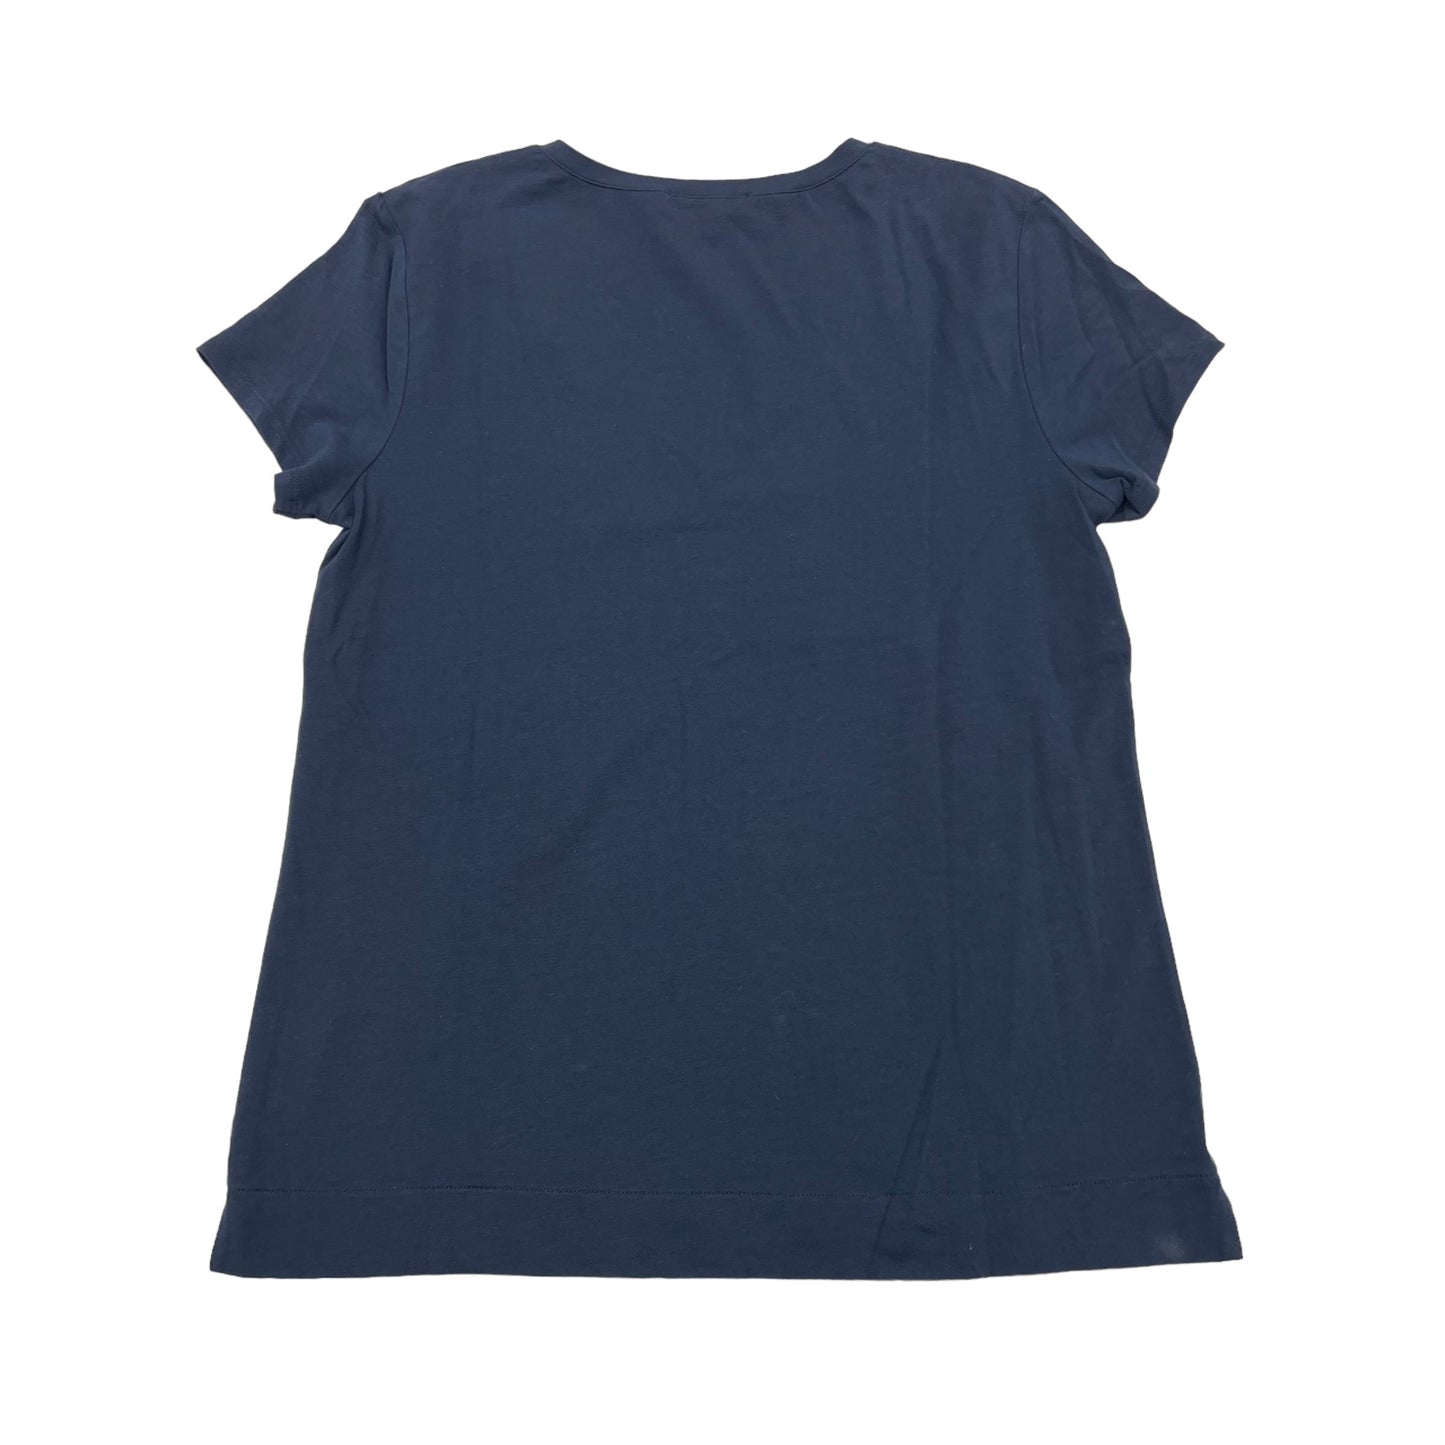 NAVY WHITE AND WARREN TOP SS, Size L